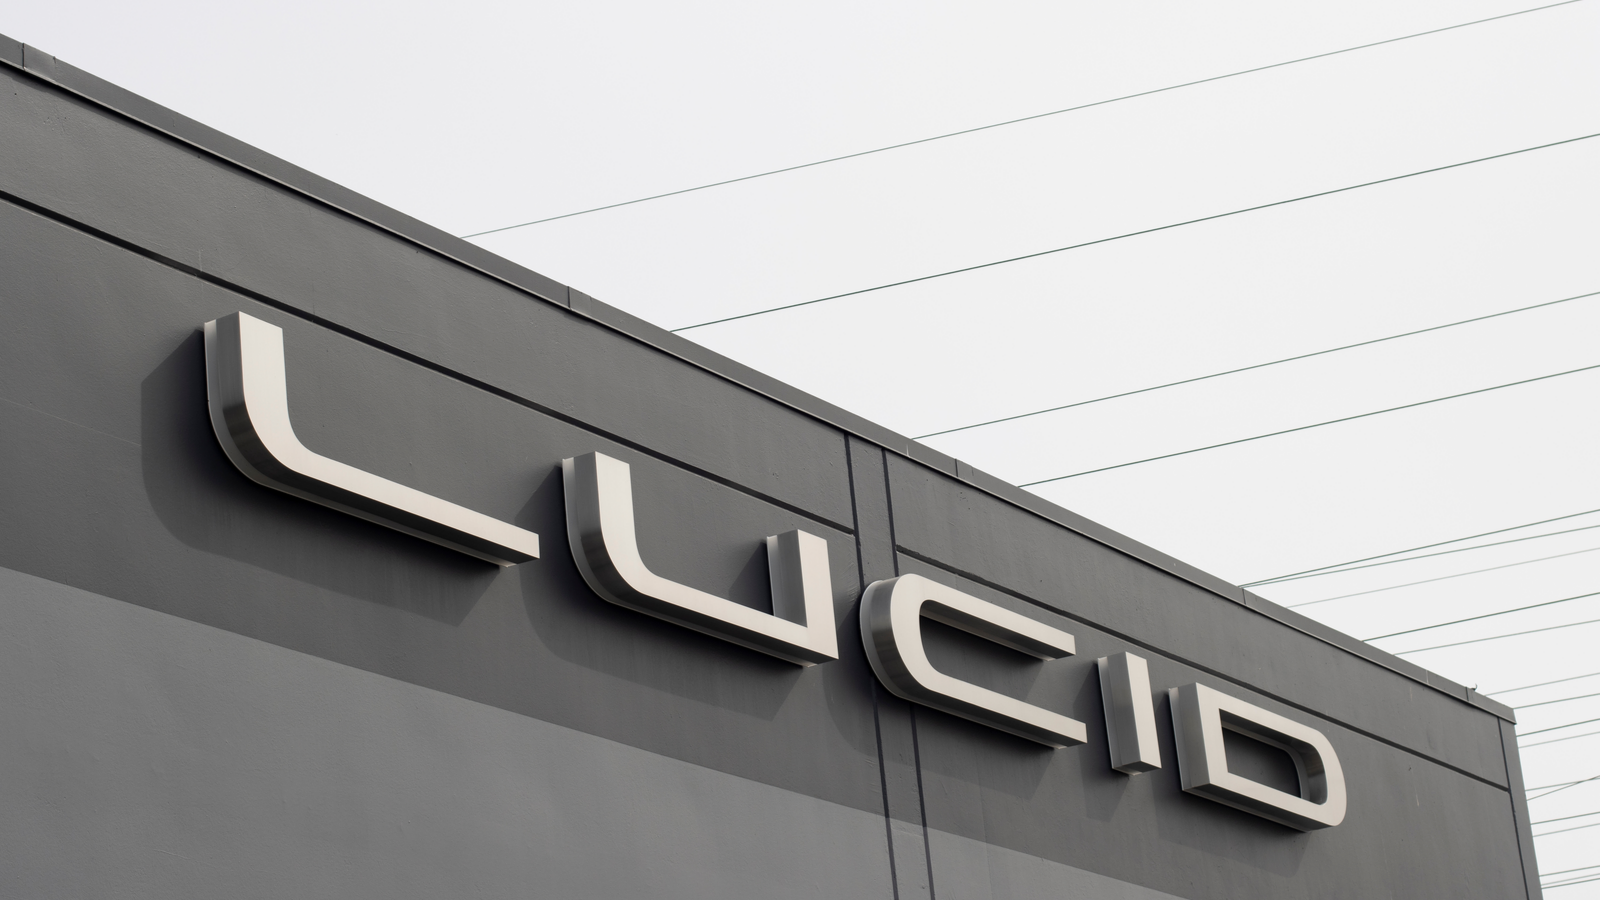 Closeup of the Lucid logo seen at a Lucid showroom in Millbrae, California. LCID stock.